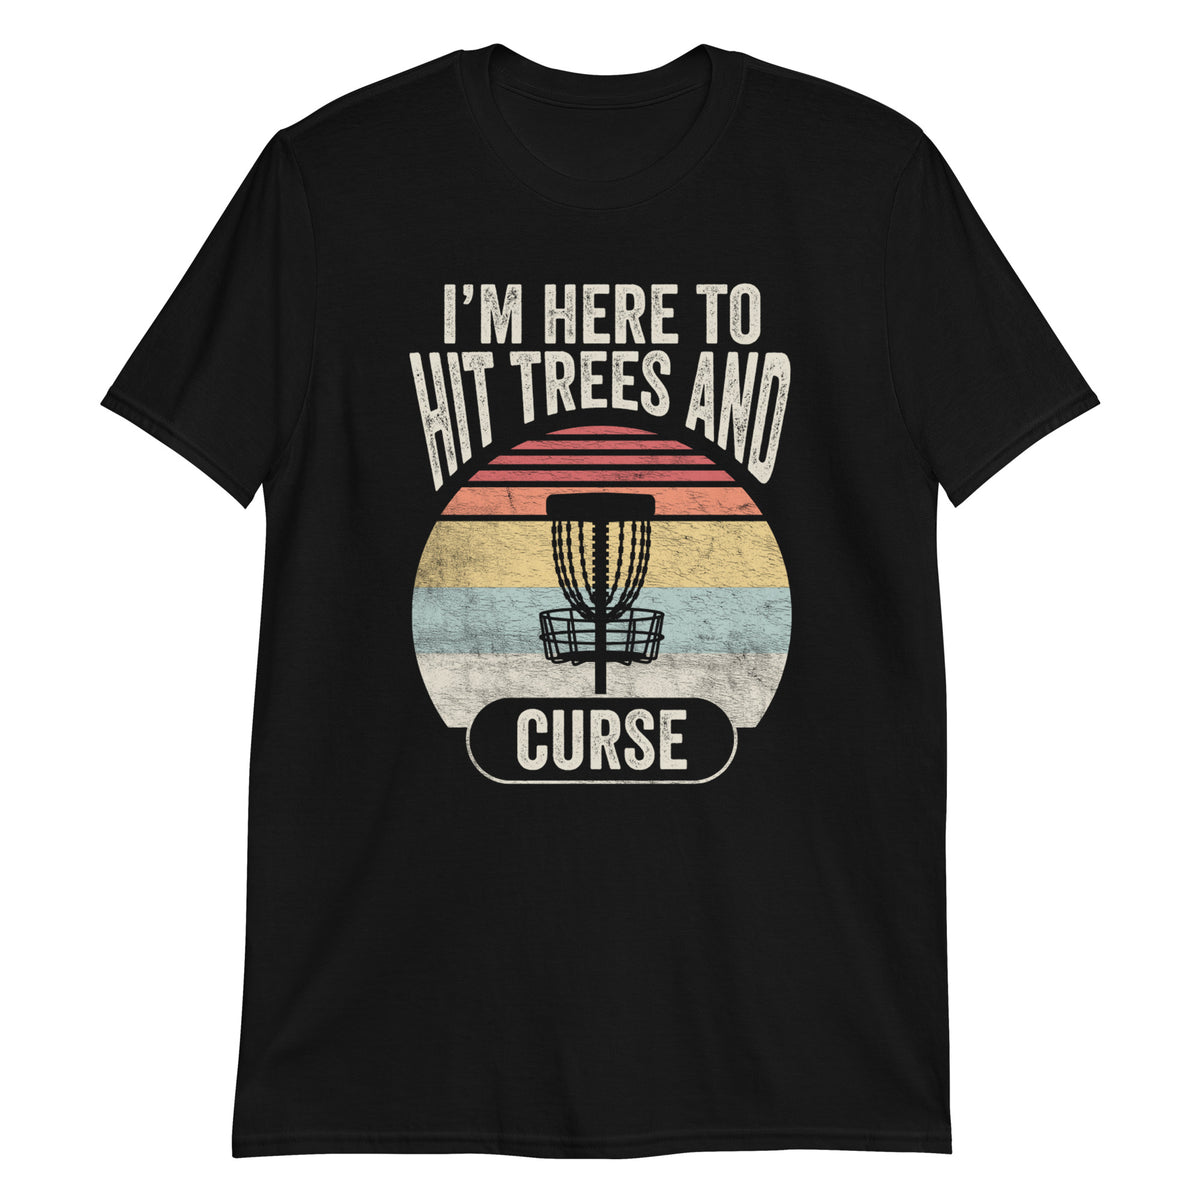 I'm Here to Hit Trees and Curse T-Shirt